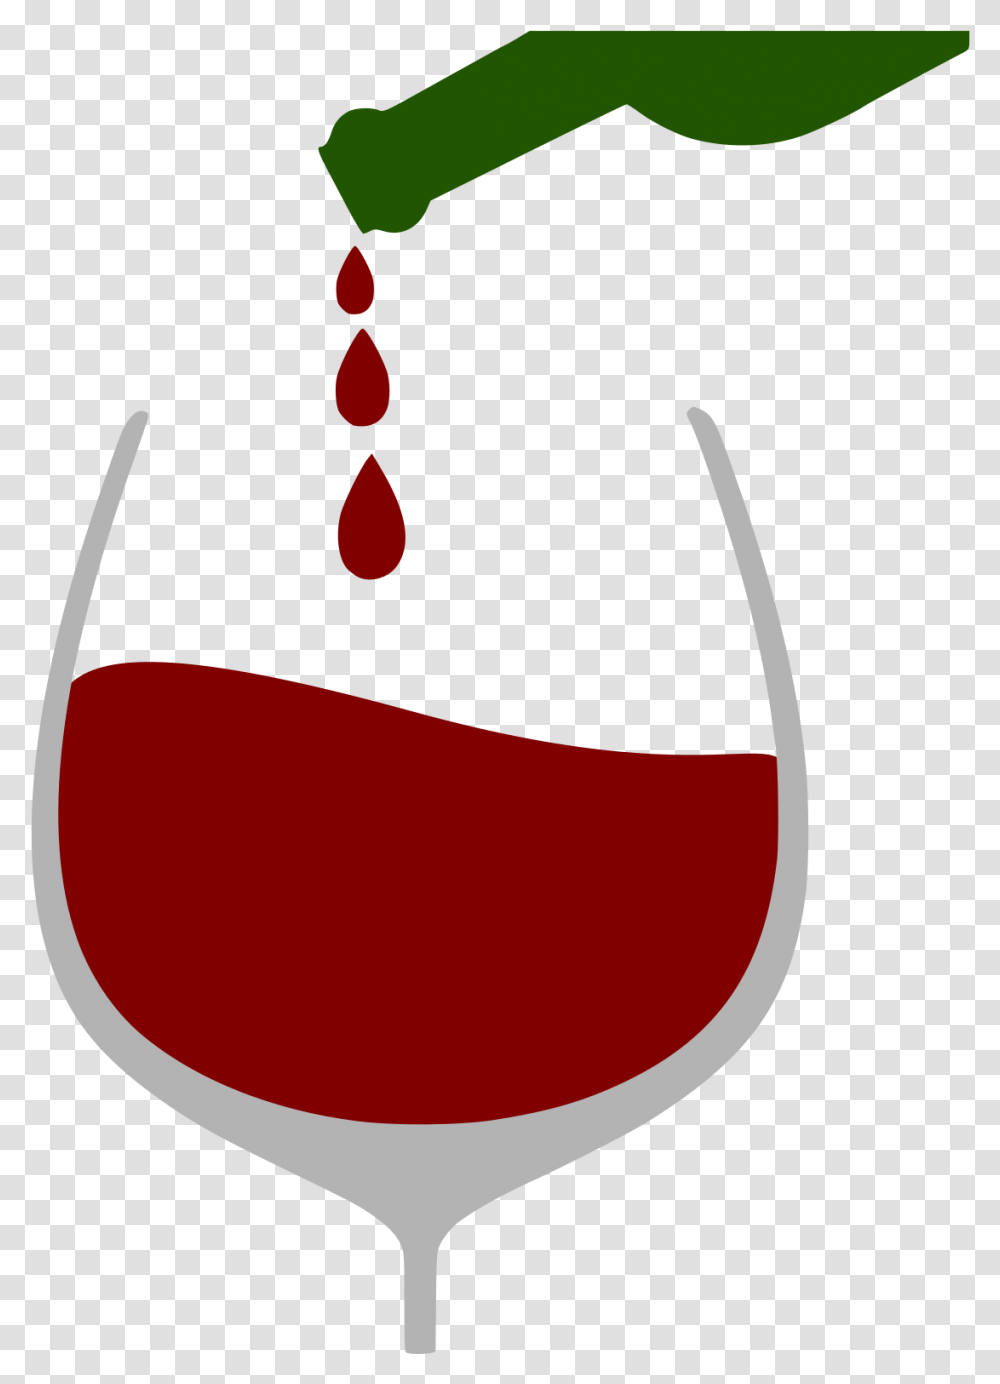 Free Download Wine Glass Clipart Wine Glass Red Wine Wine Glass, Alcohol, Beverage, Drink, Goblet Transparent Png